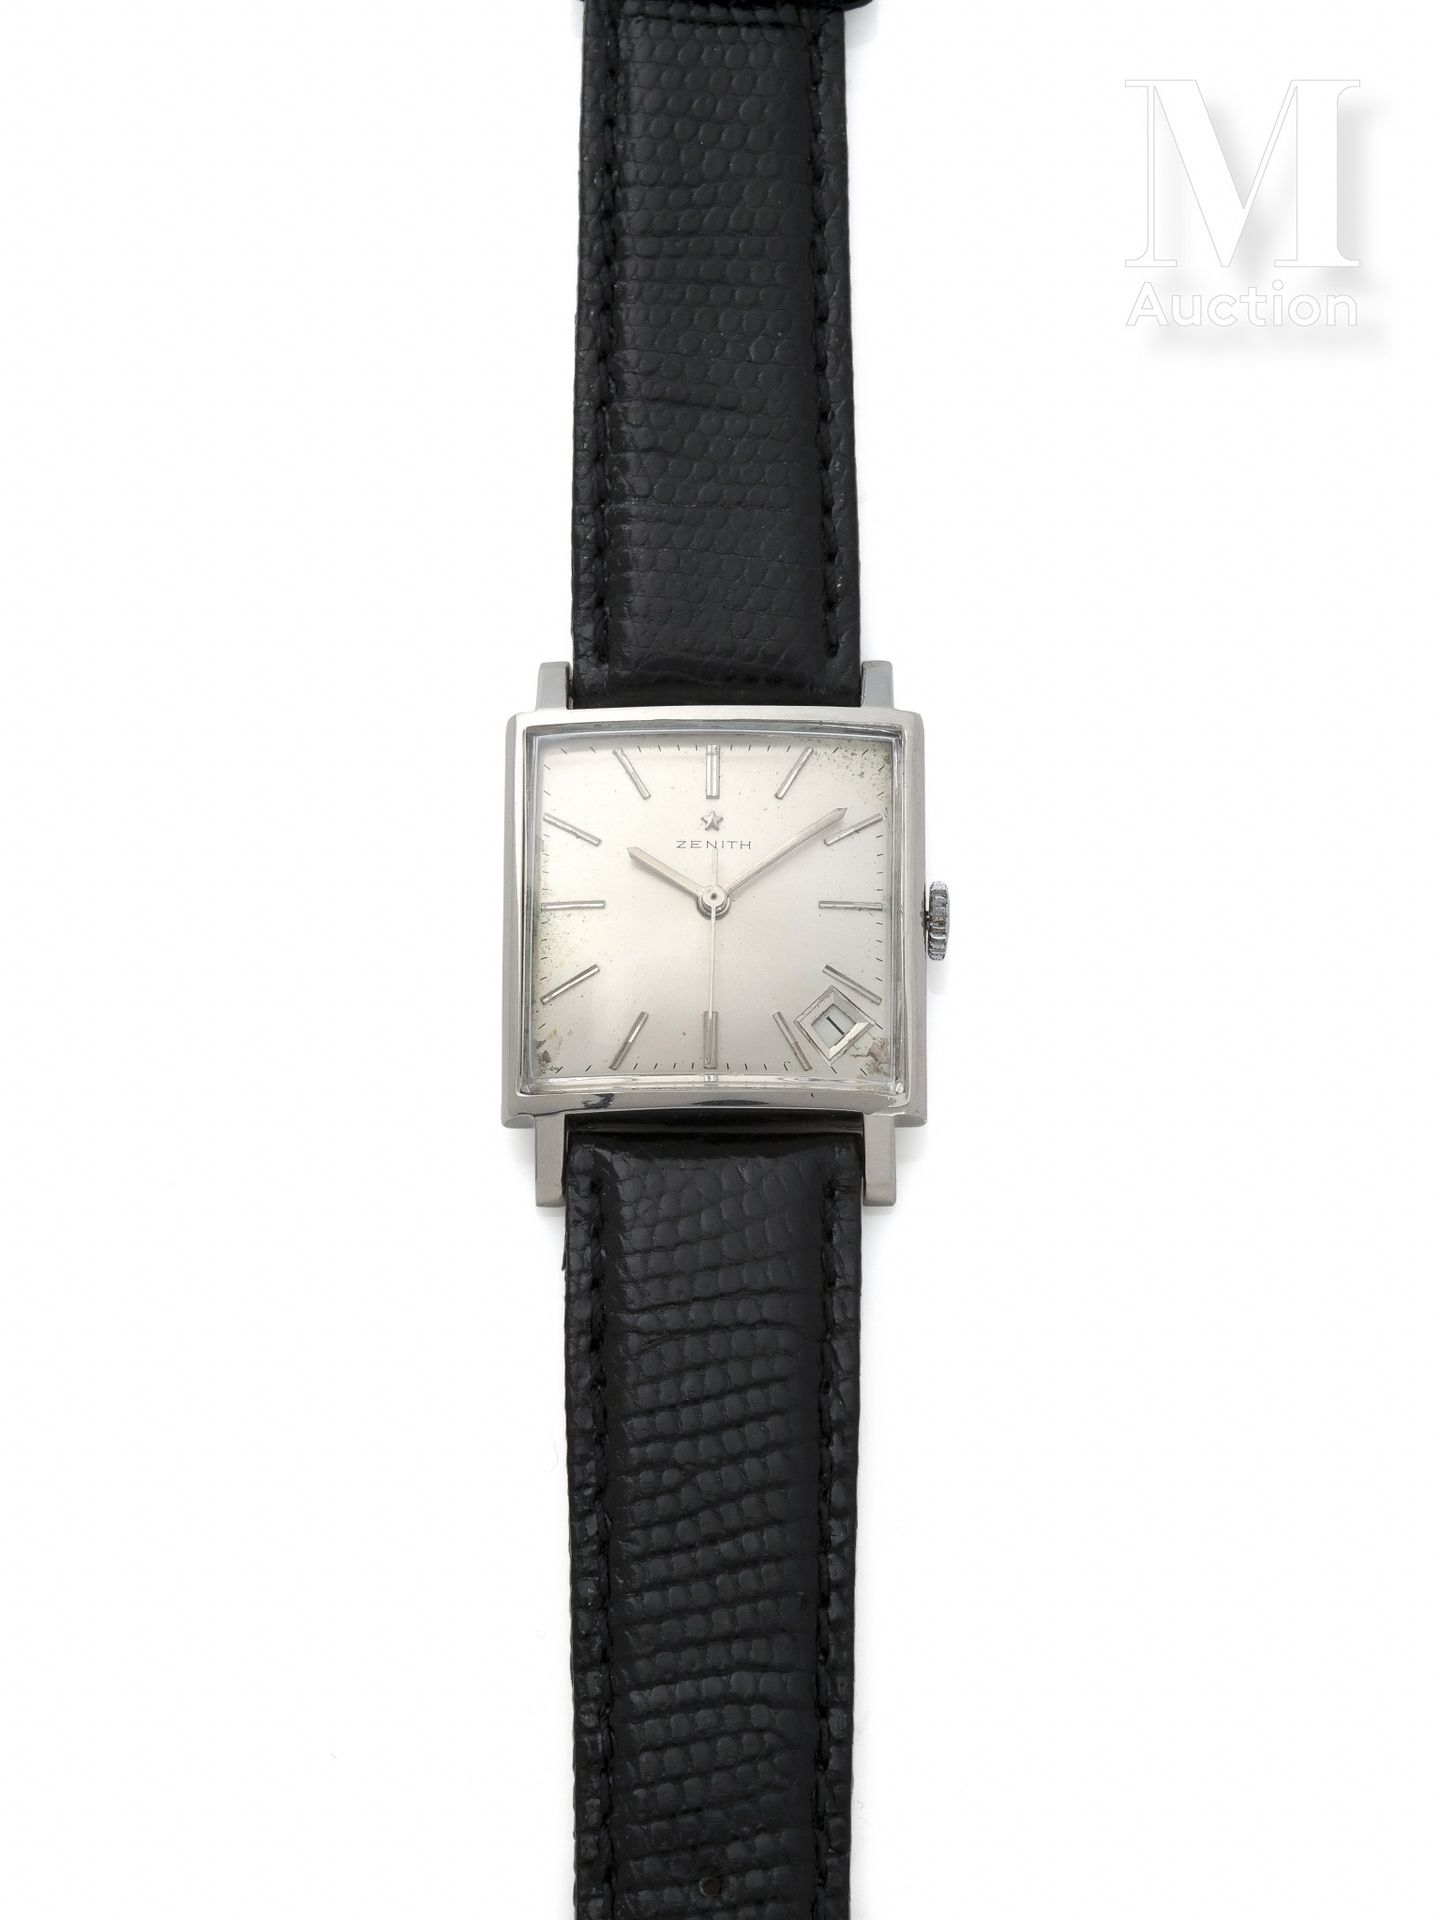 ZENITH Circa 1960

Square steel man's watch. Silvered dial with baton markers. D&hellip;